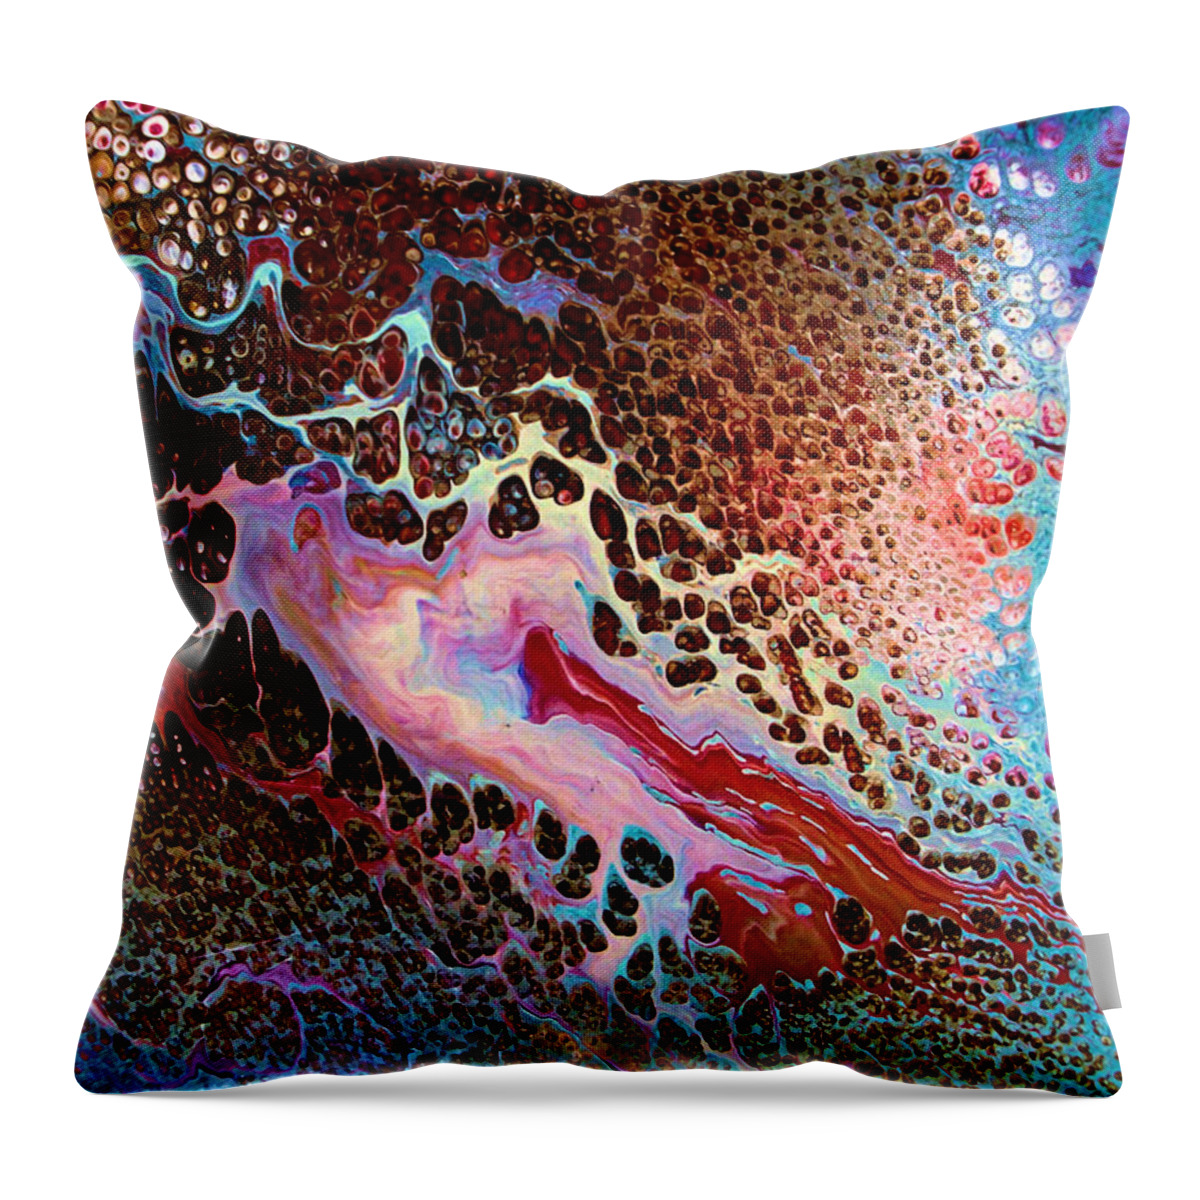 Creative Energy Throw Pillow featuring the painting Creative Energy by Natalie Holland